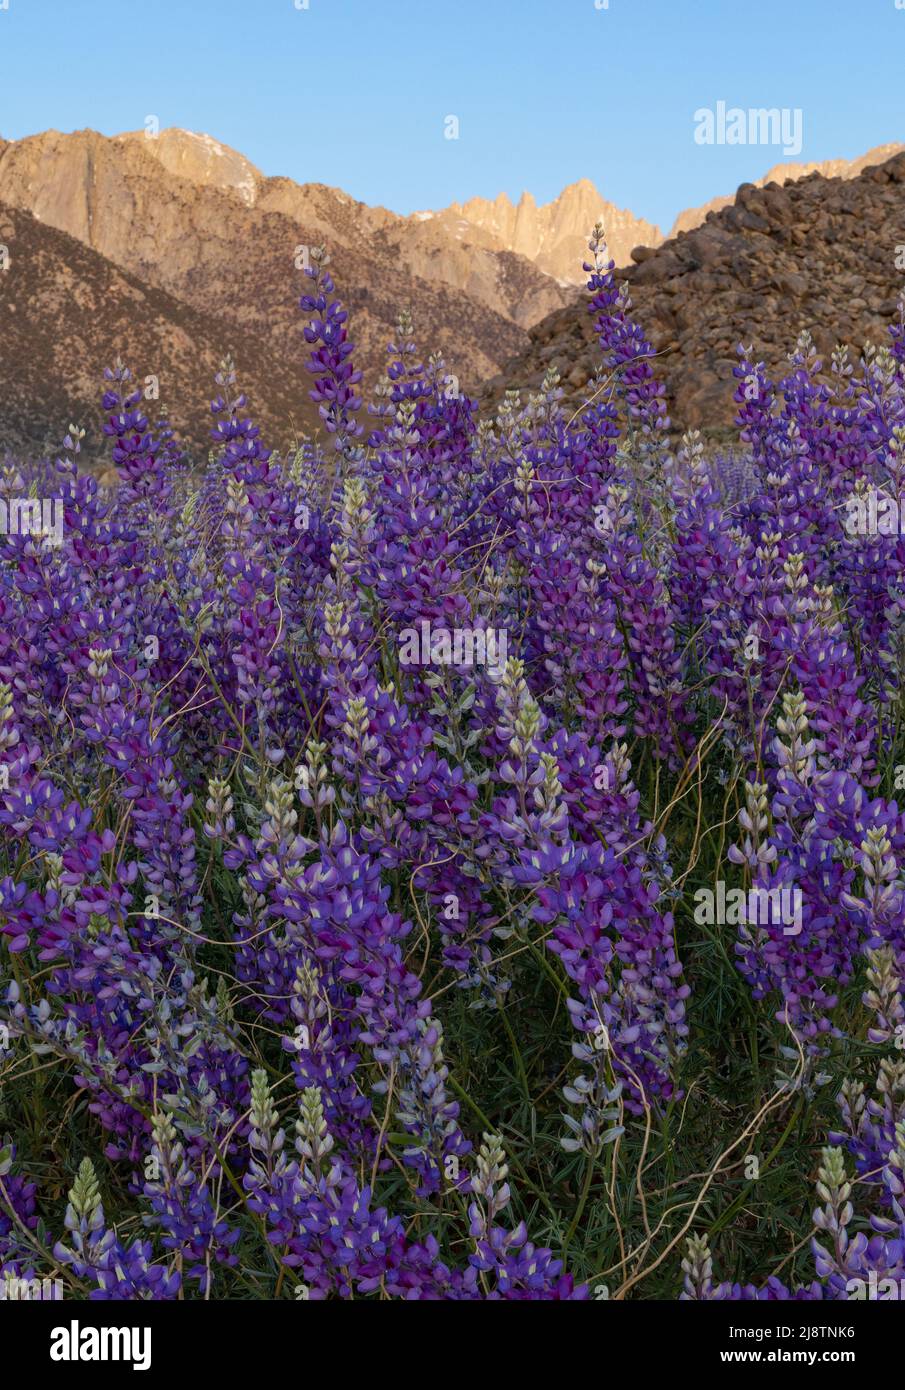 Wild blue lupine in front of the Sierra Nevada mountains at sunrise Stock Photo